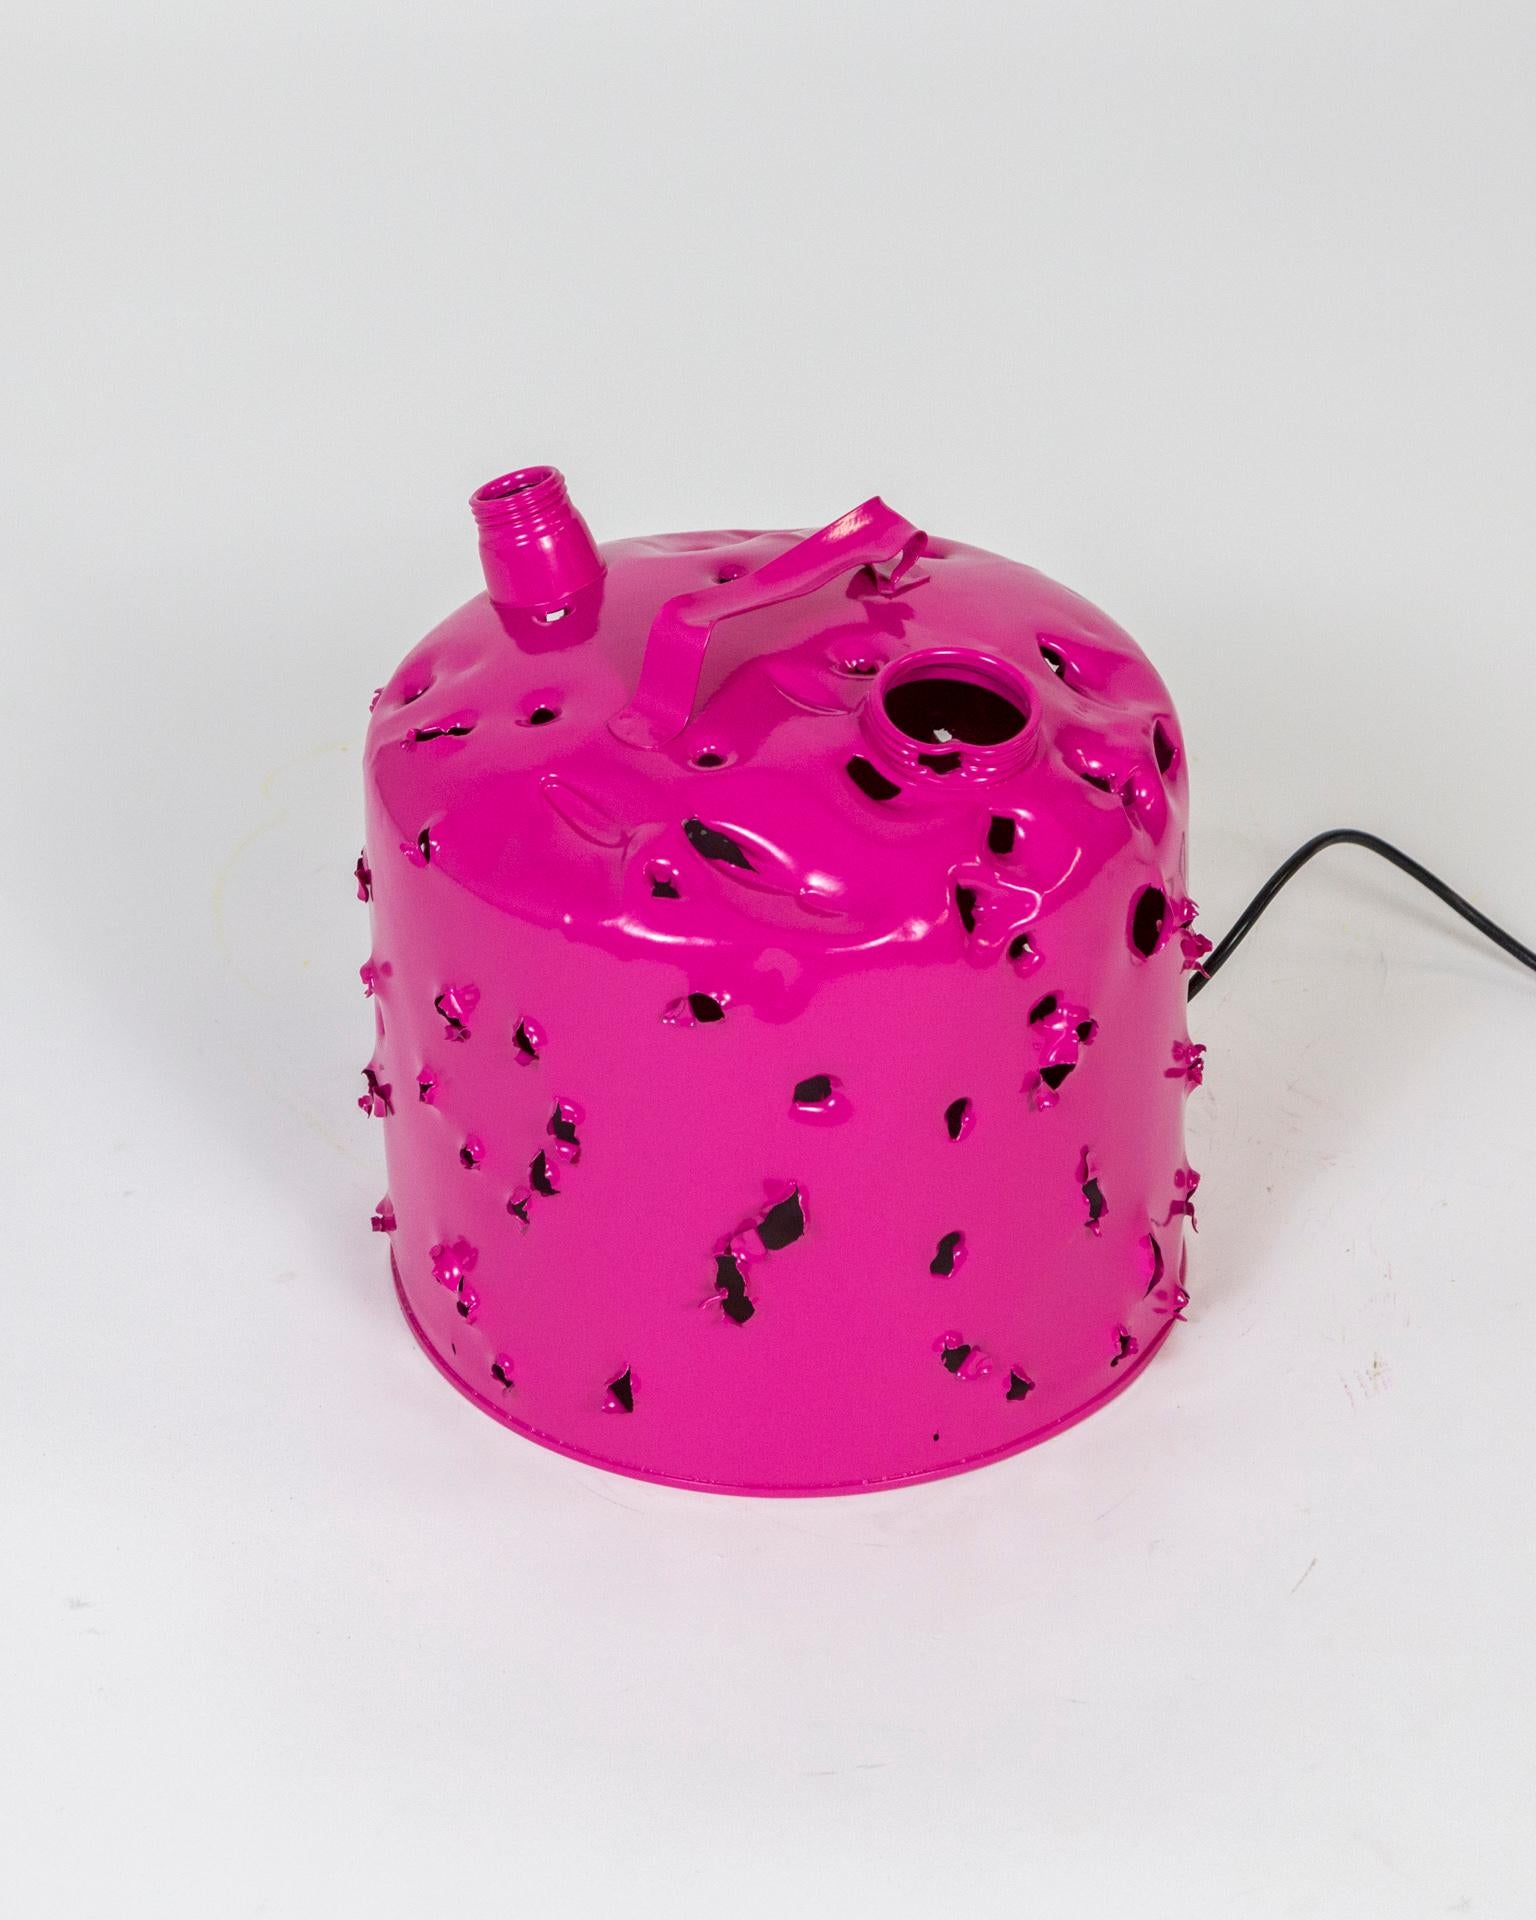 Magenta Bullet Hole Gas Can Lamp by Charles Linder 1